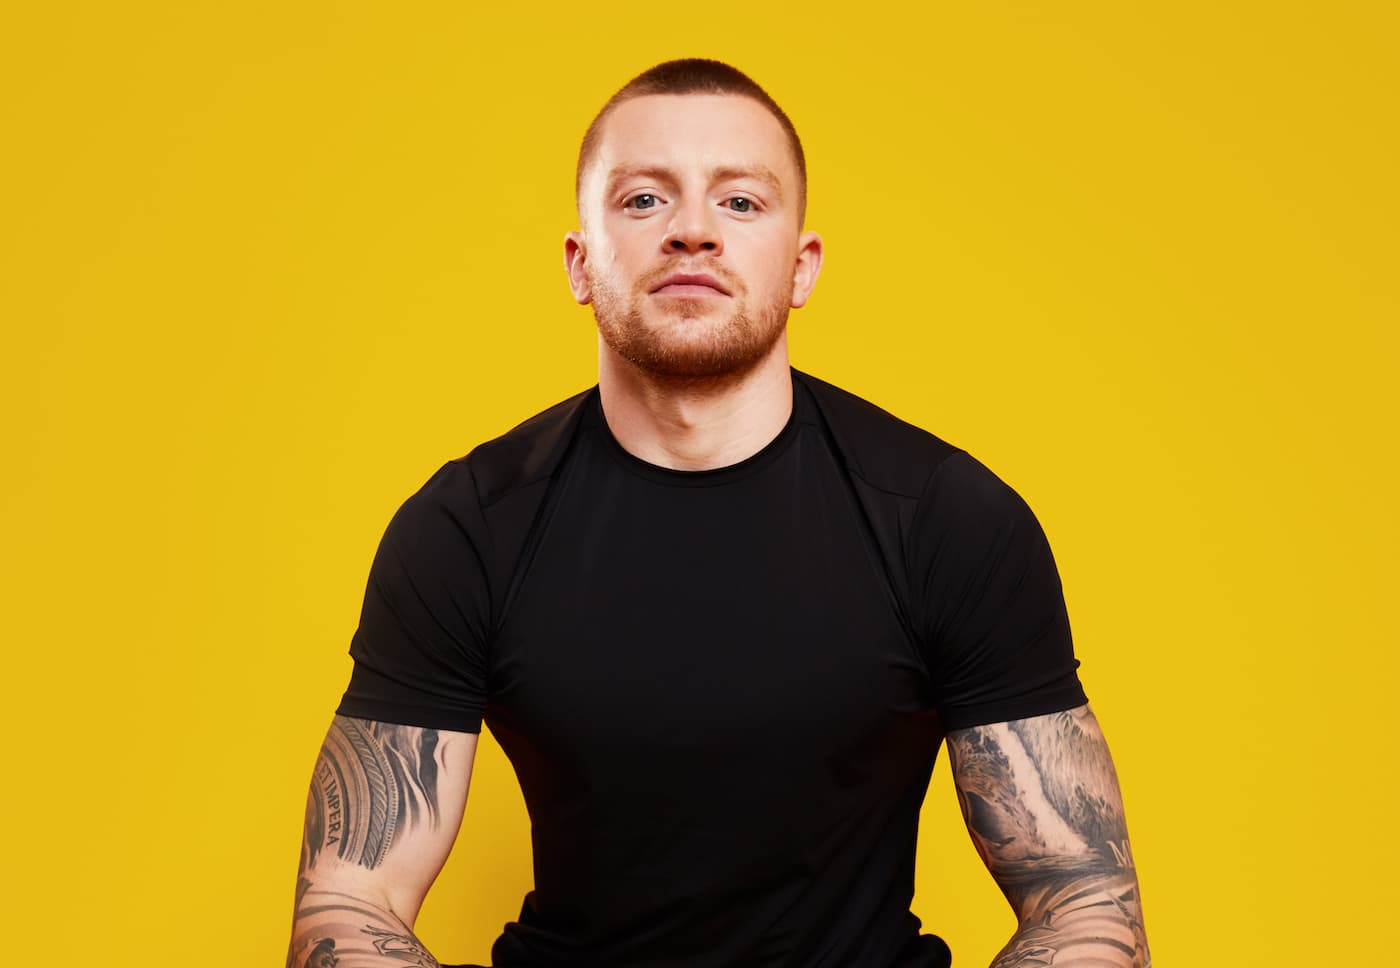 Adam peaty opens up about why hes eating more plant based foods sharing top fitness nutrition tips